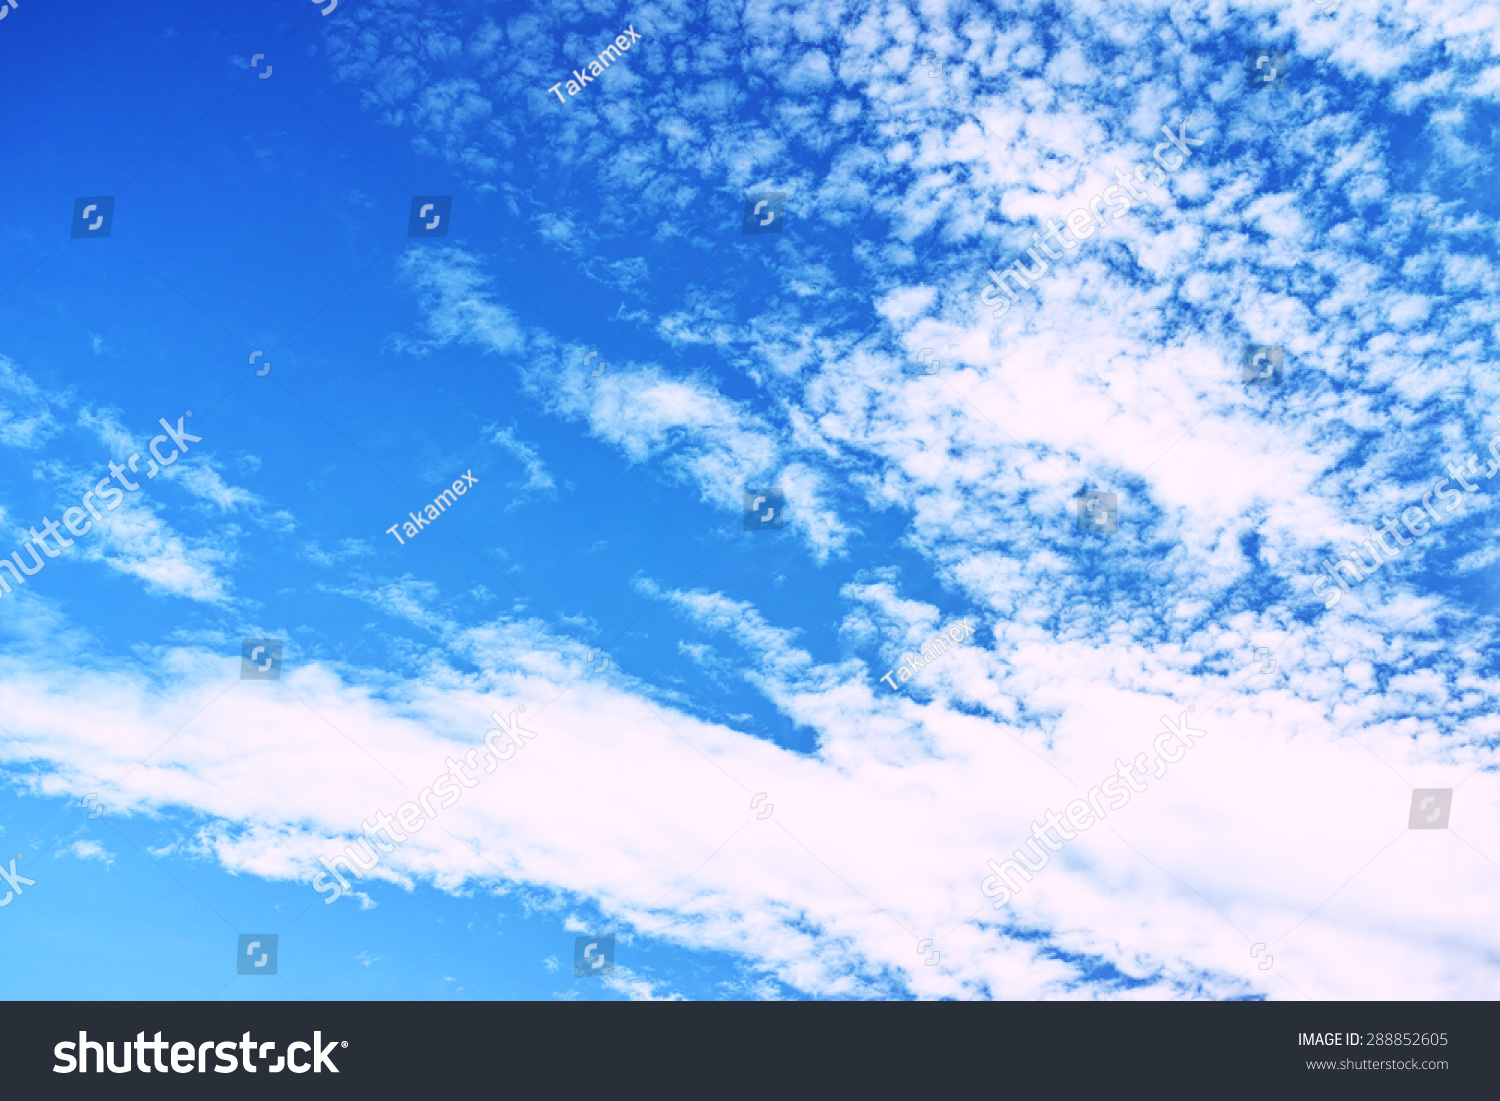 White clouds on blue sky #288852605